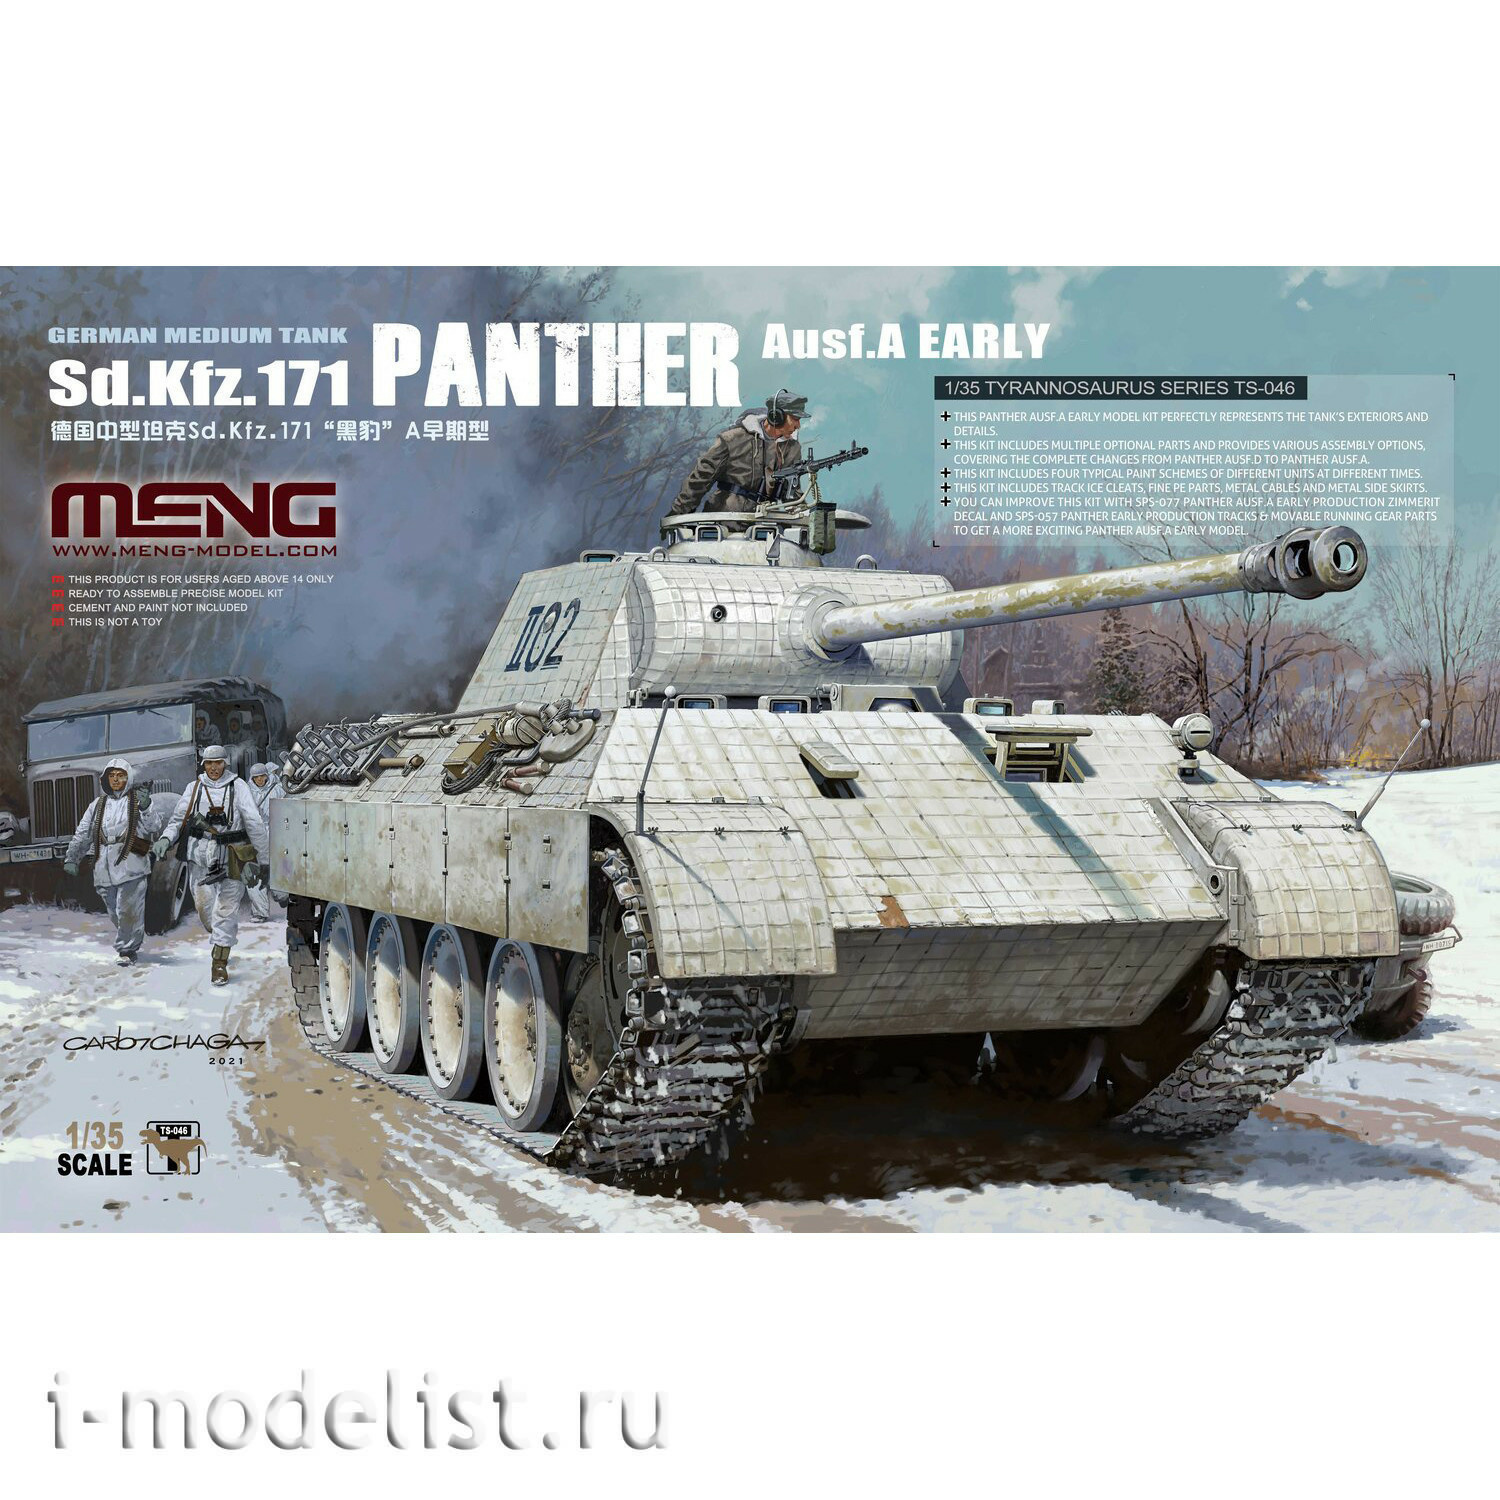 TS-046 Meng 1/35 Tank Sd.Kfz. 171 Panther Ausf. A (Early)